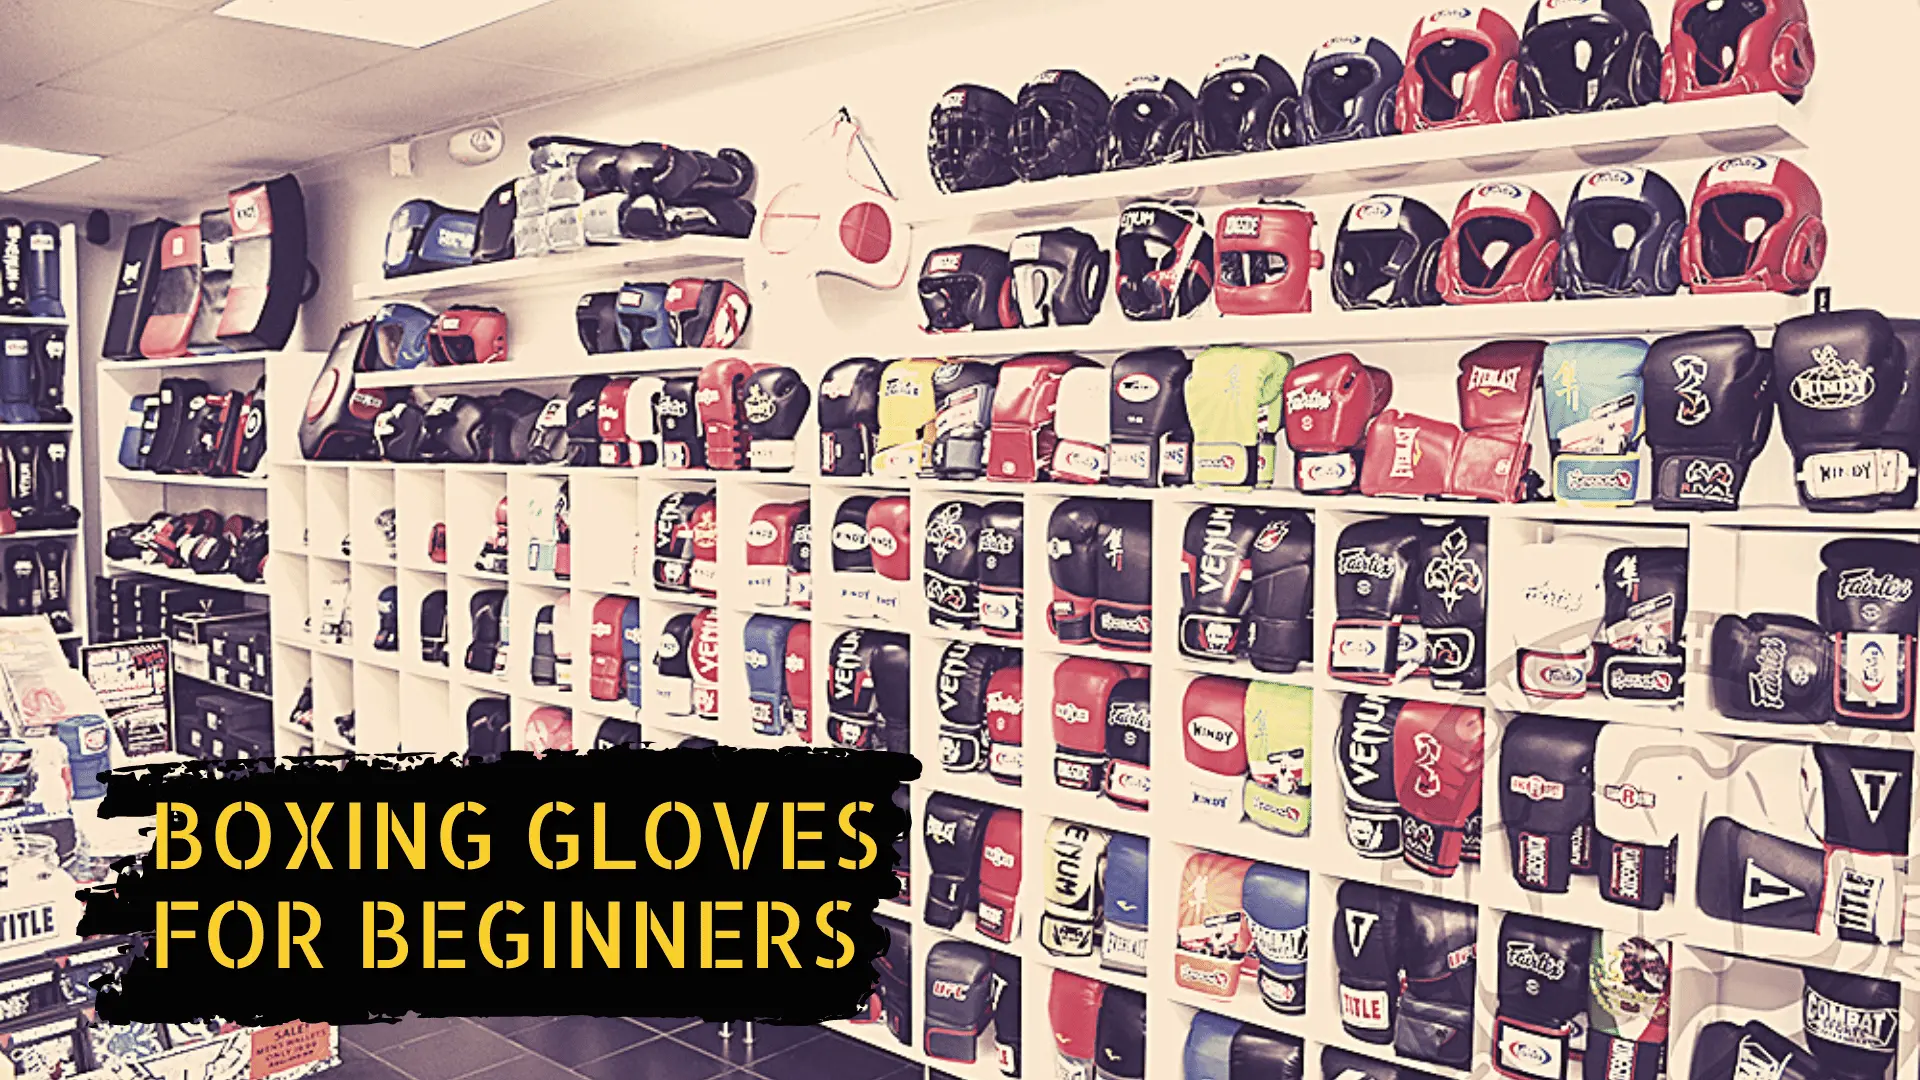 A shelf showing lots of boxing gloves